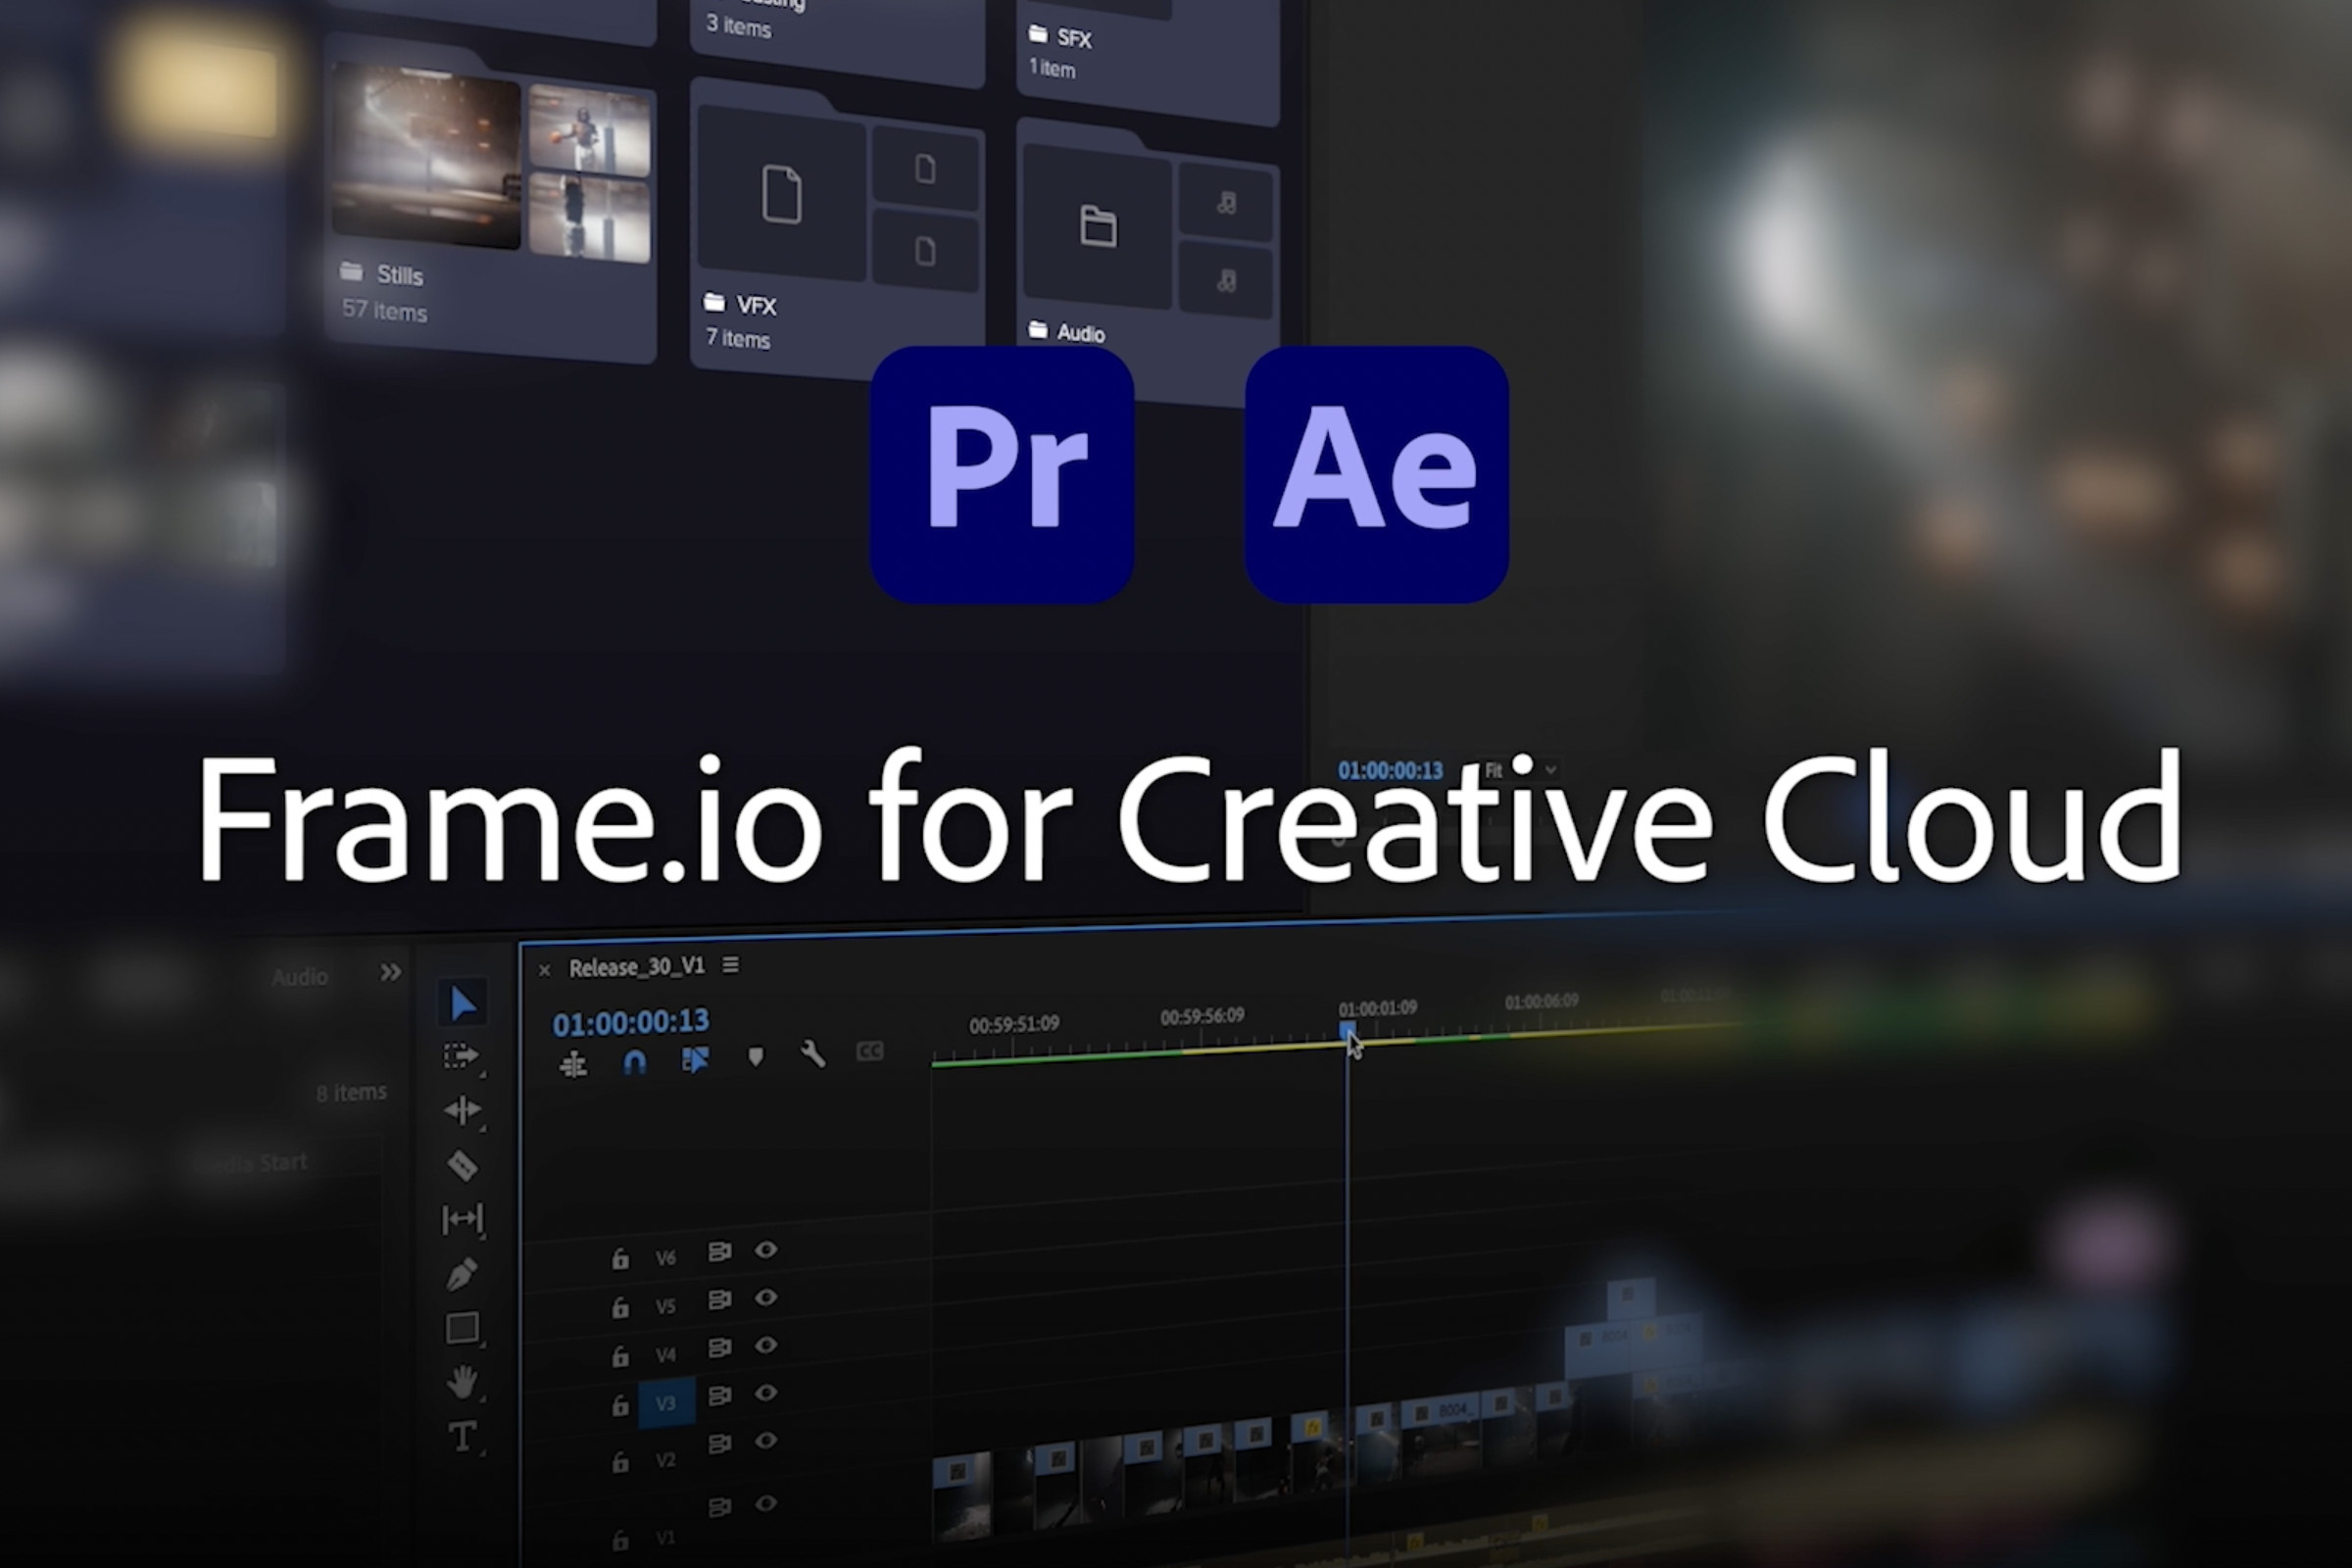 Frame.io is now built into Adobe’s video editing software.